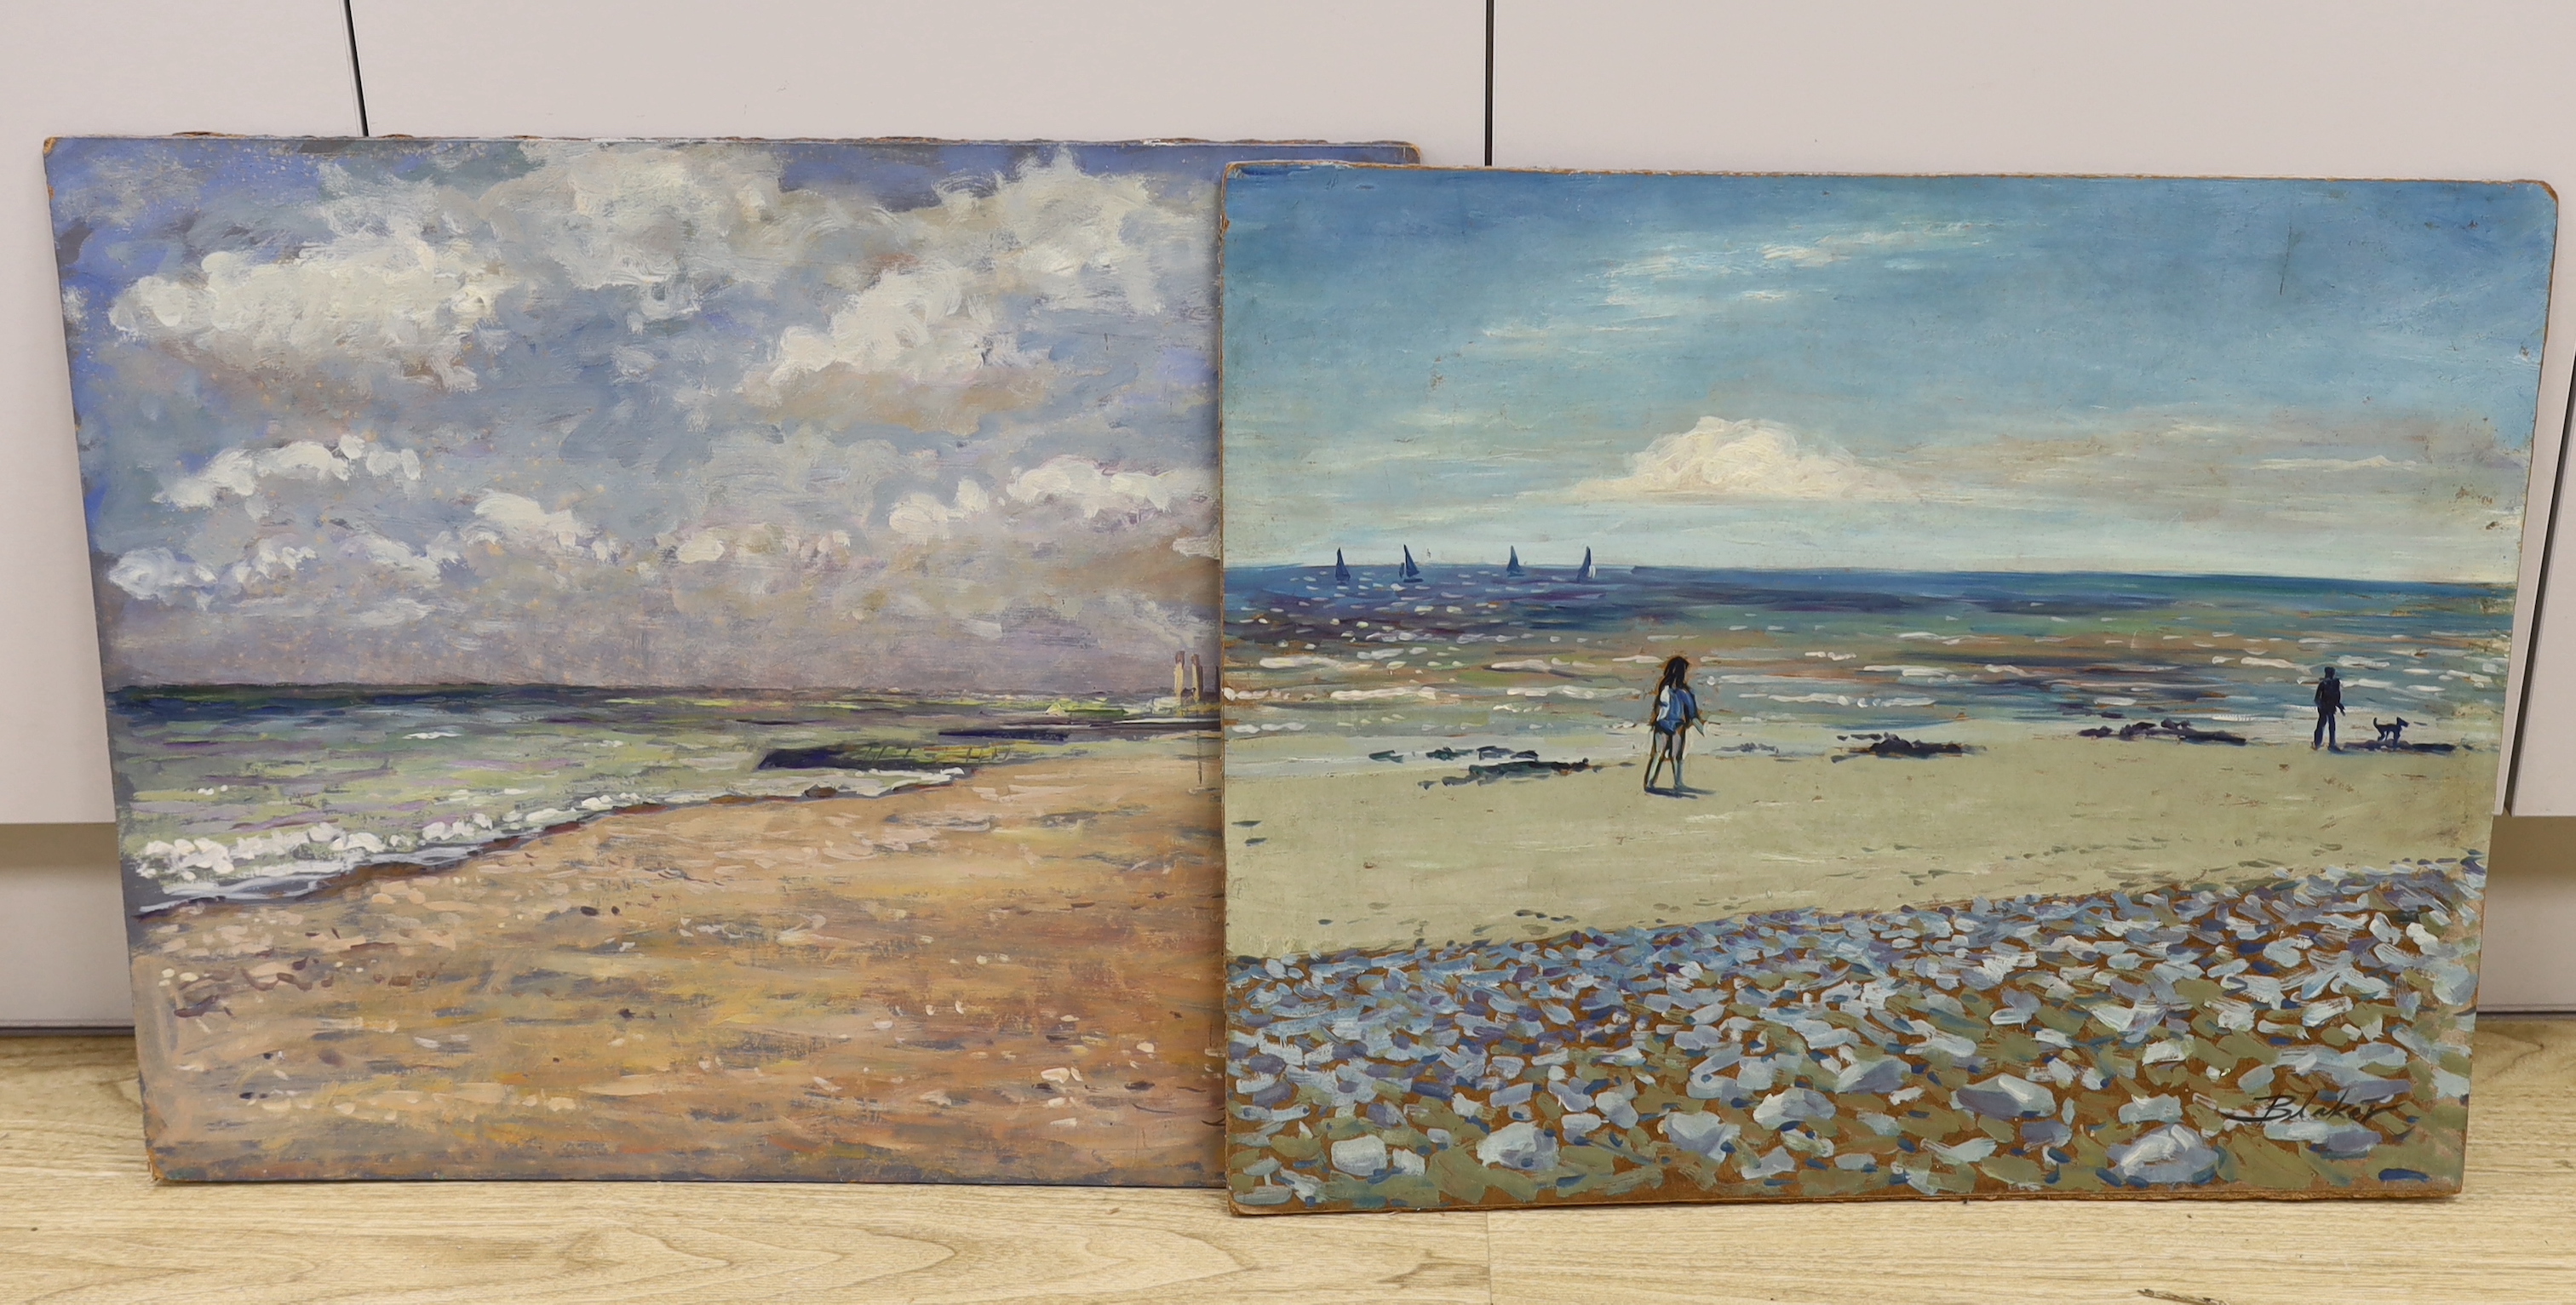 Michael John Blaker (1928-2018), two oils on board, view from Hove towards Southwick and Shoreham and Sussex beach with walkers, signed, largest 51 x 61cm, unframed